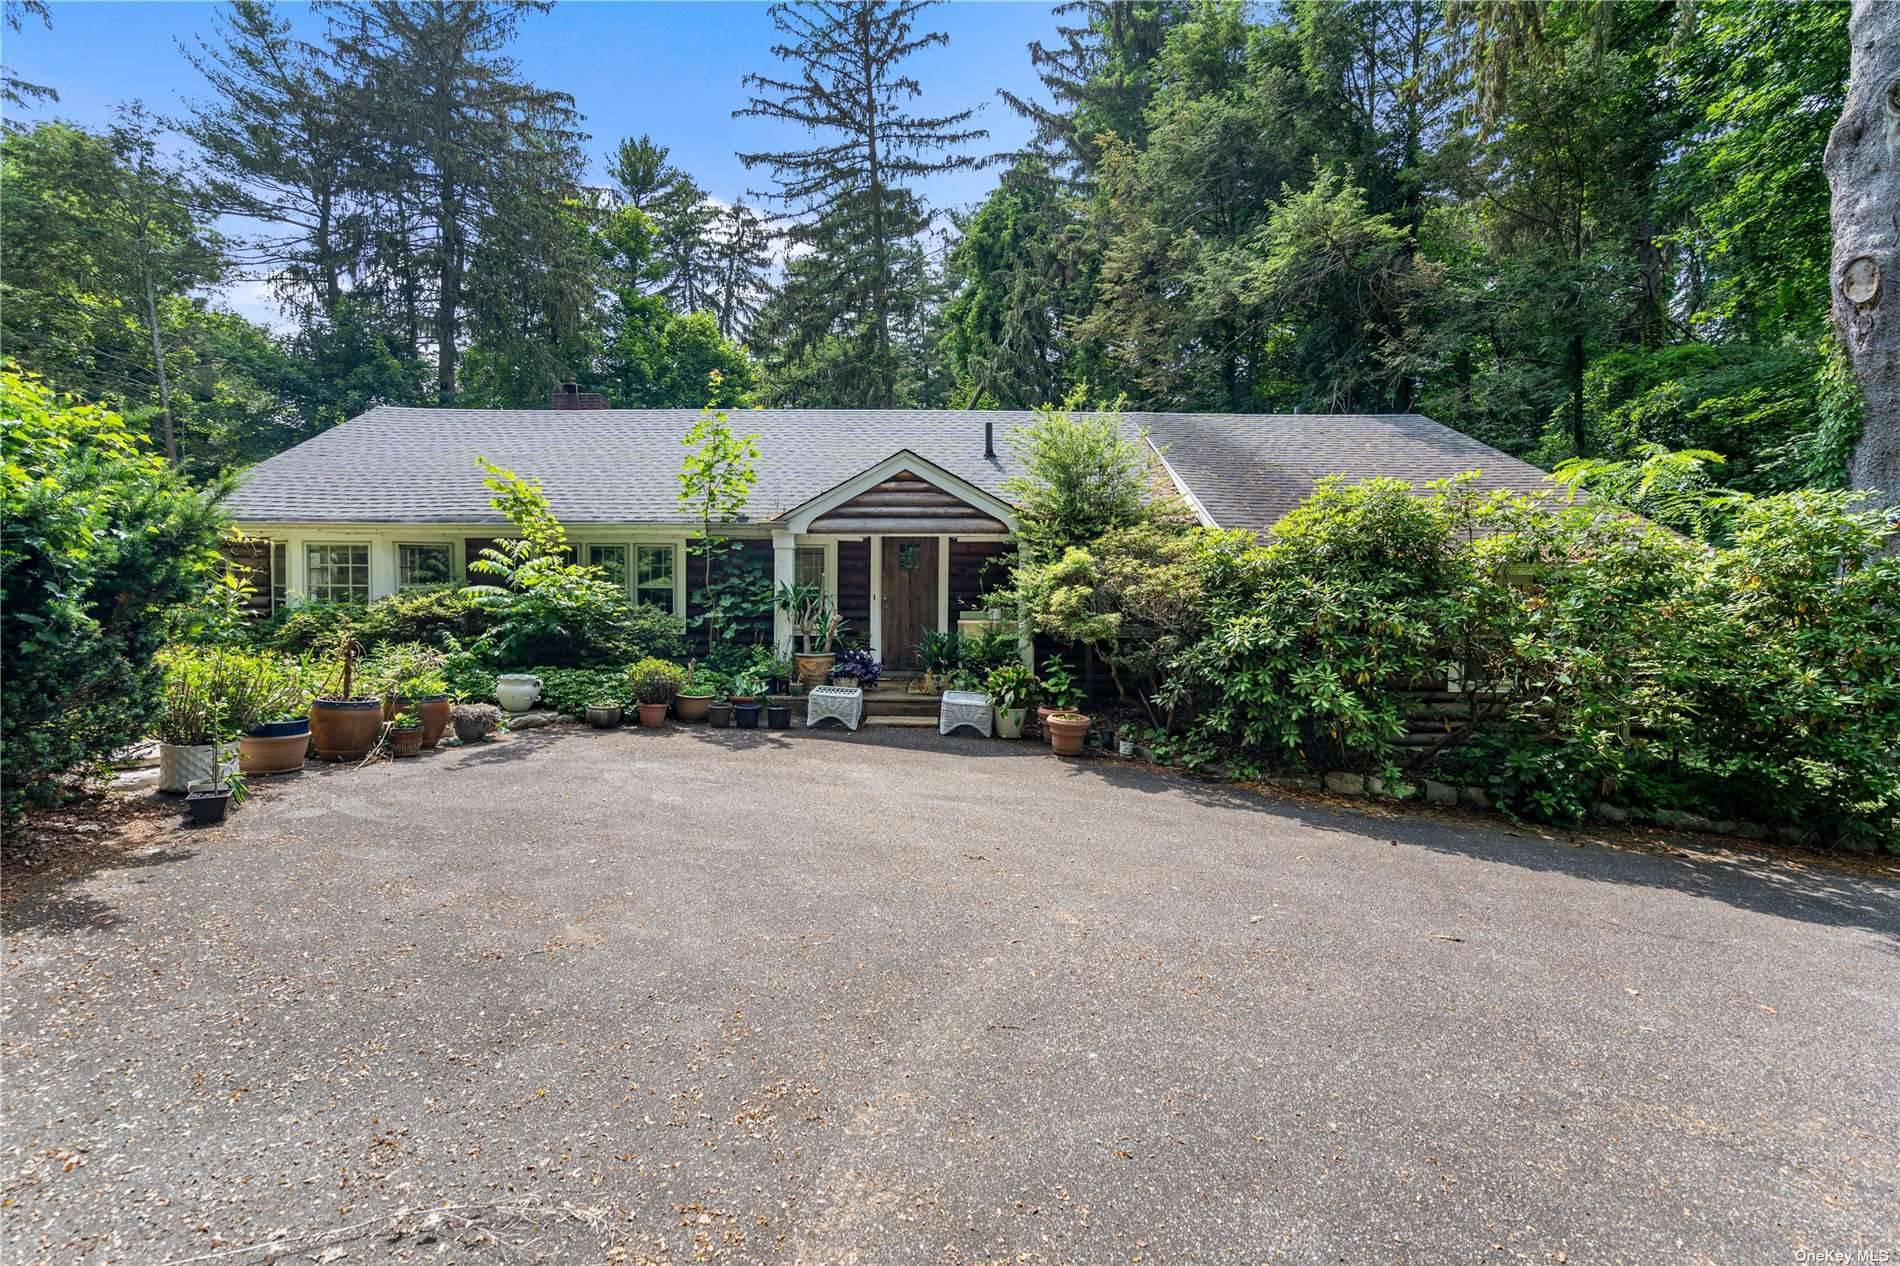 Brookville. Nestled in the depths of Brookville is this original log cabin property with additional detached 2 car garage and in ground swimming pool on a private and secluded 2.